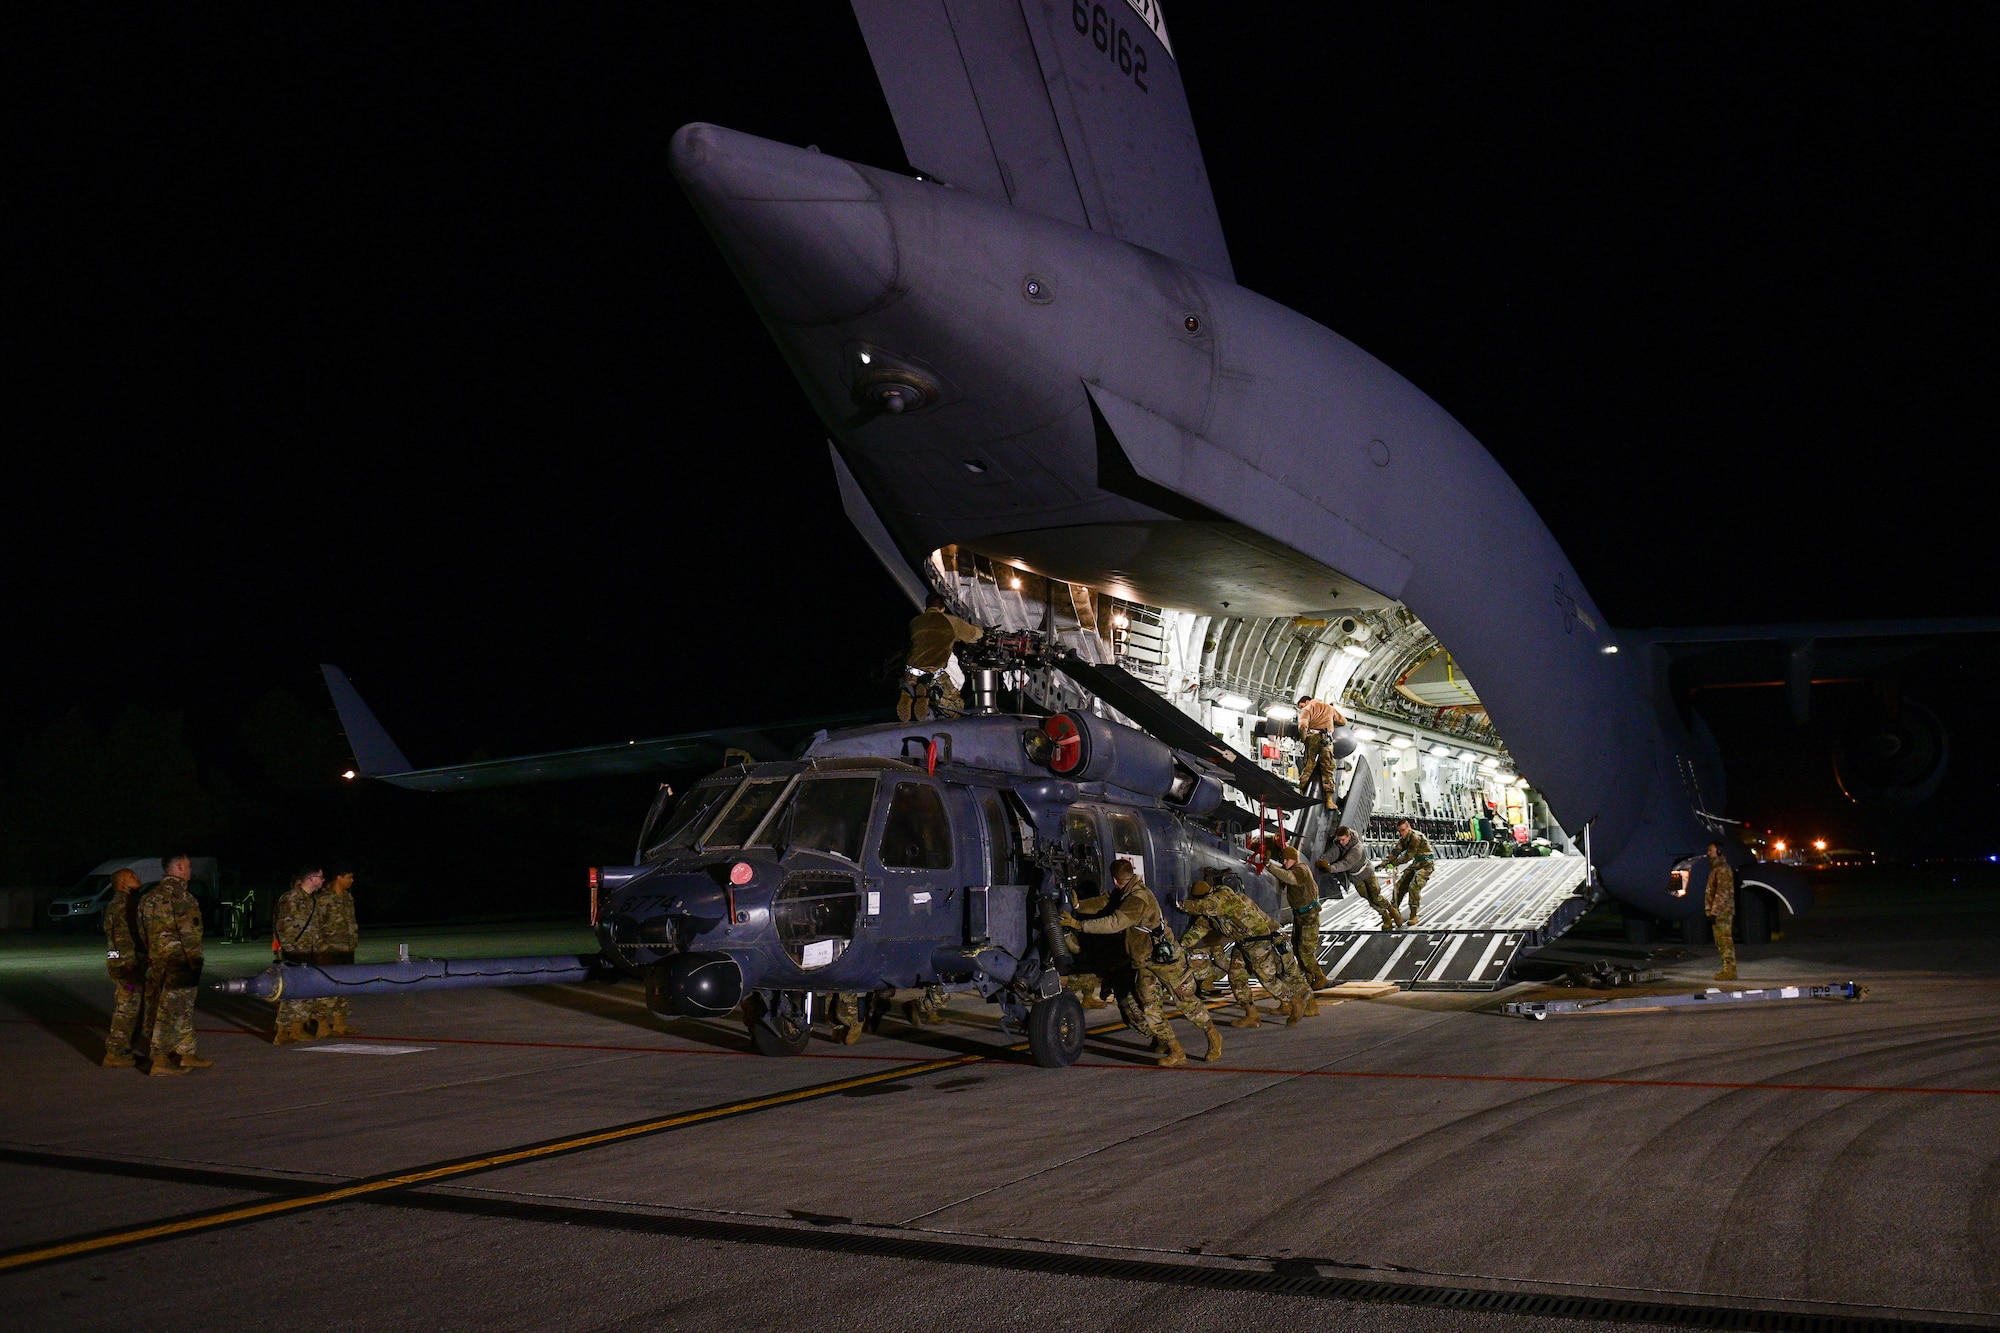 U.S. Air Force Airmen assigned to the 724th Air Mobility Squadron unload an HH-60G Pave Hawk that was deployed with the 56th Rescue Squadron, at Aviano Air Base, Italy, Feb. 9, 2022. The primary mission of the HH-60G is to conduct day or night personnel recovery operations into hostile environments to recover isolated personnel during war.  The 56th RQS integrates with the Guardian Angels weapon system and other special forces to support insertion, extraction and recovery of both U.S. and allied combatants. (U.S. Air Force photo by Senior Airman Brooke Moeder)